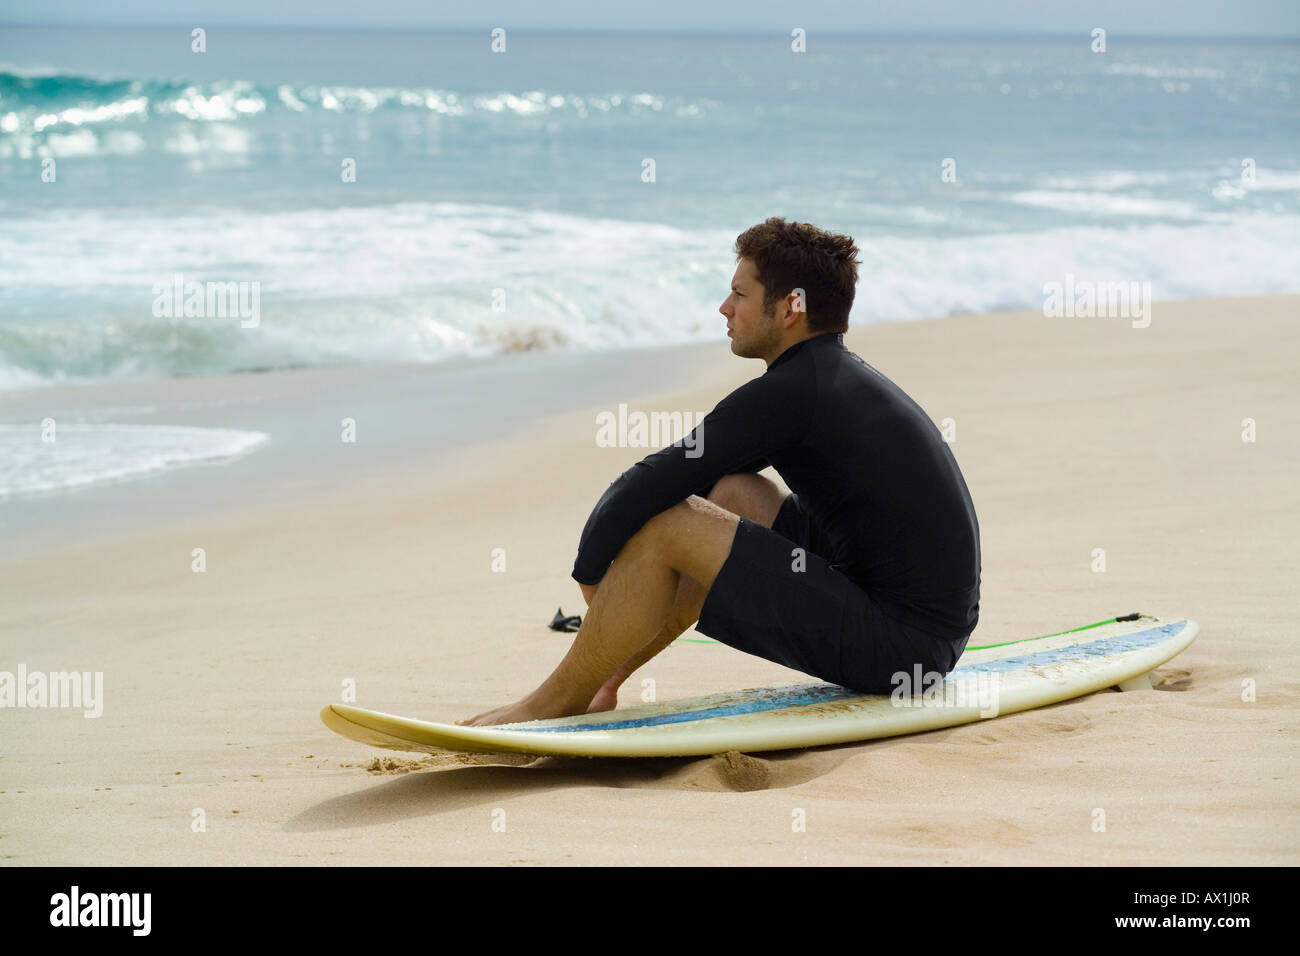 A surfer sitting on the beach Stock Photo